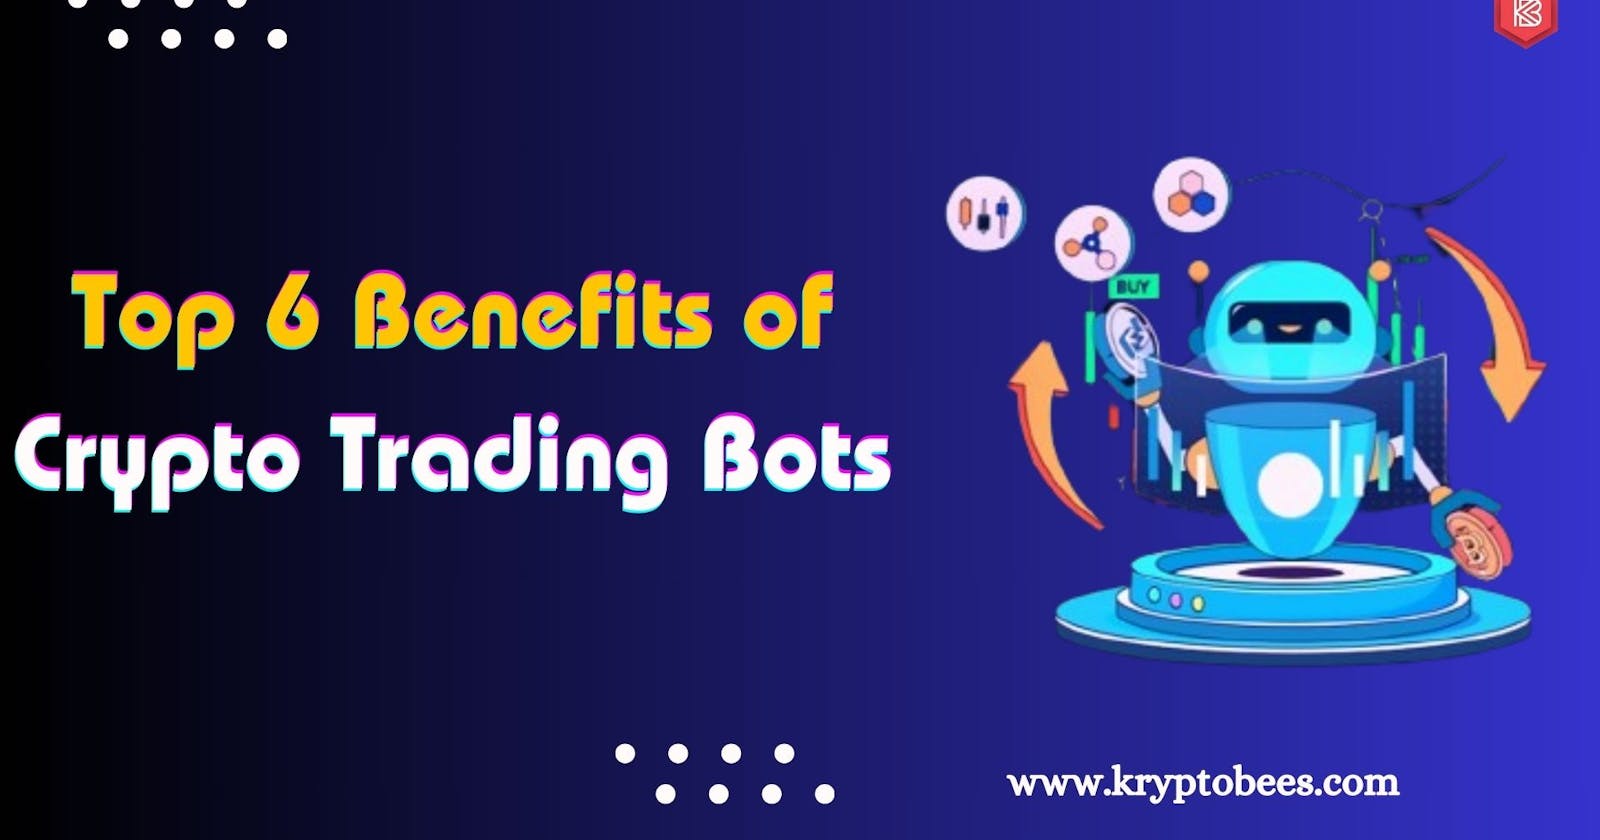 Top 6 Benefits of Crypto Trading Bots